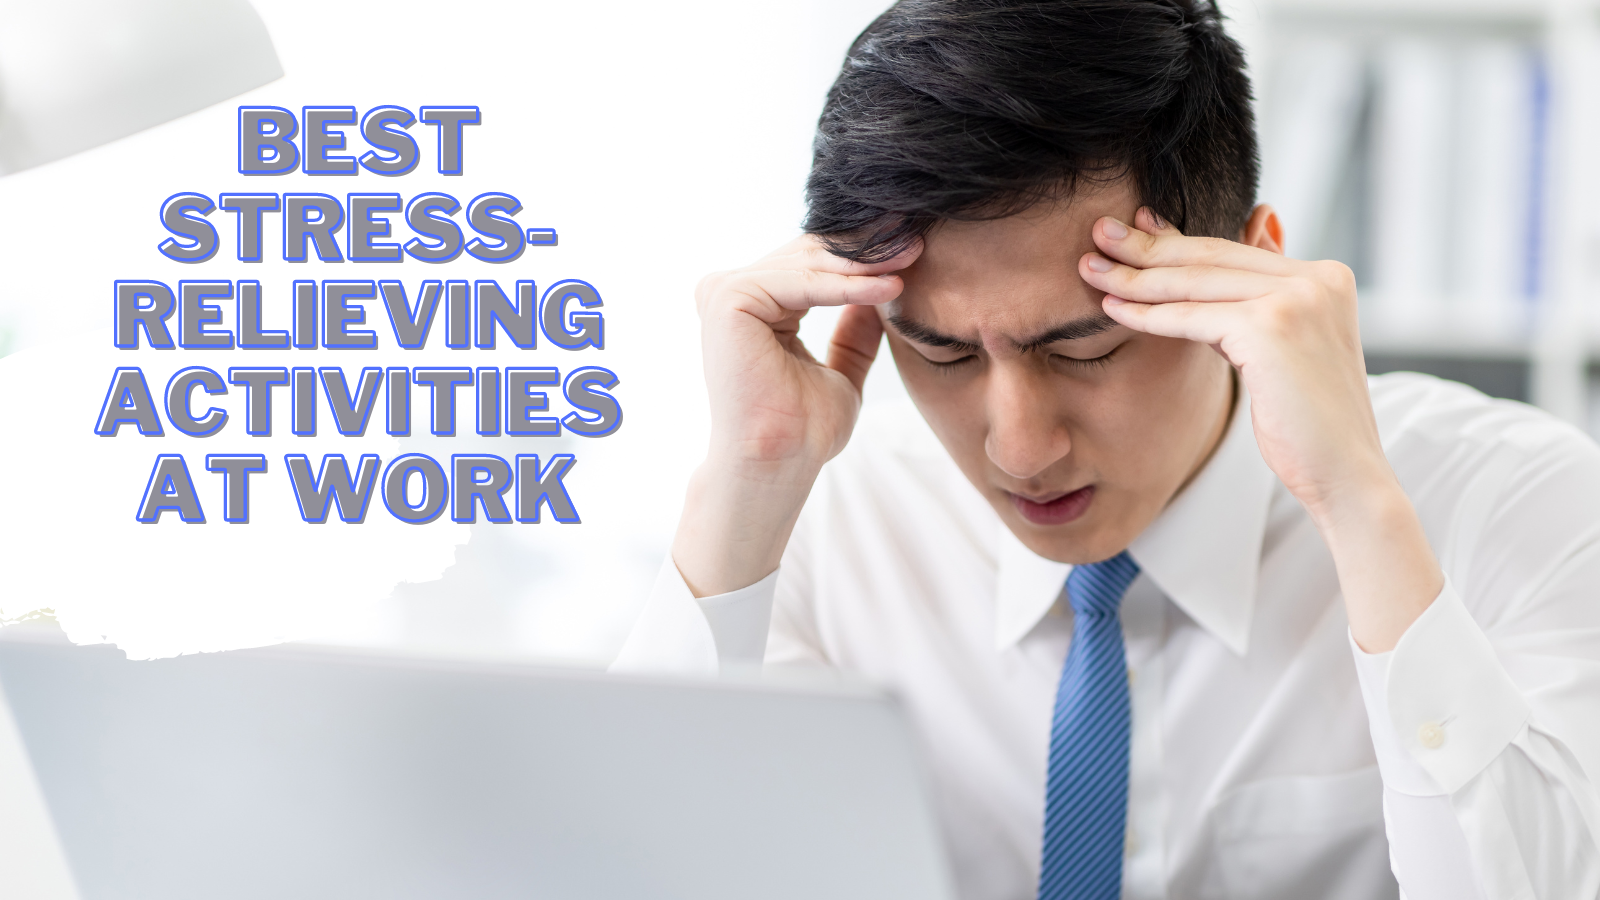 Best Stress-Relieving Activities At Work